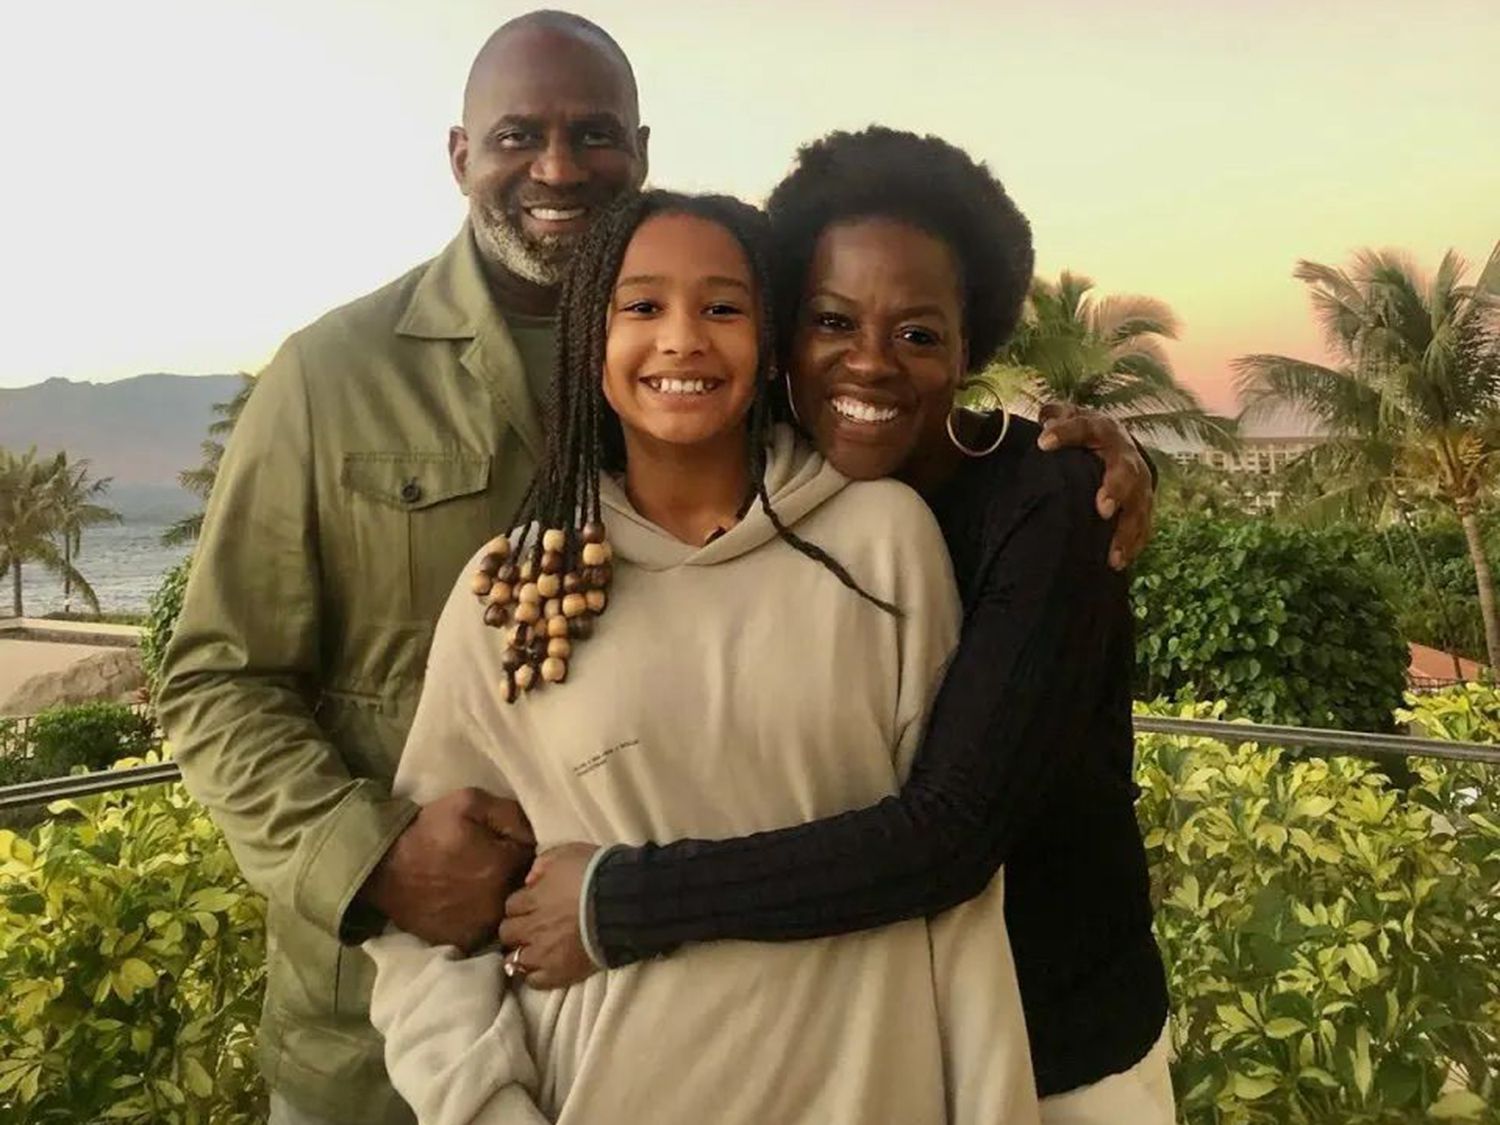 Viola with her daughter and husband